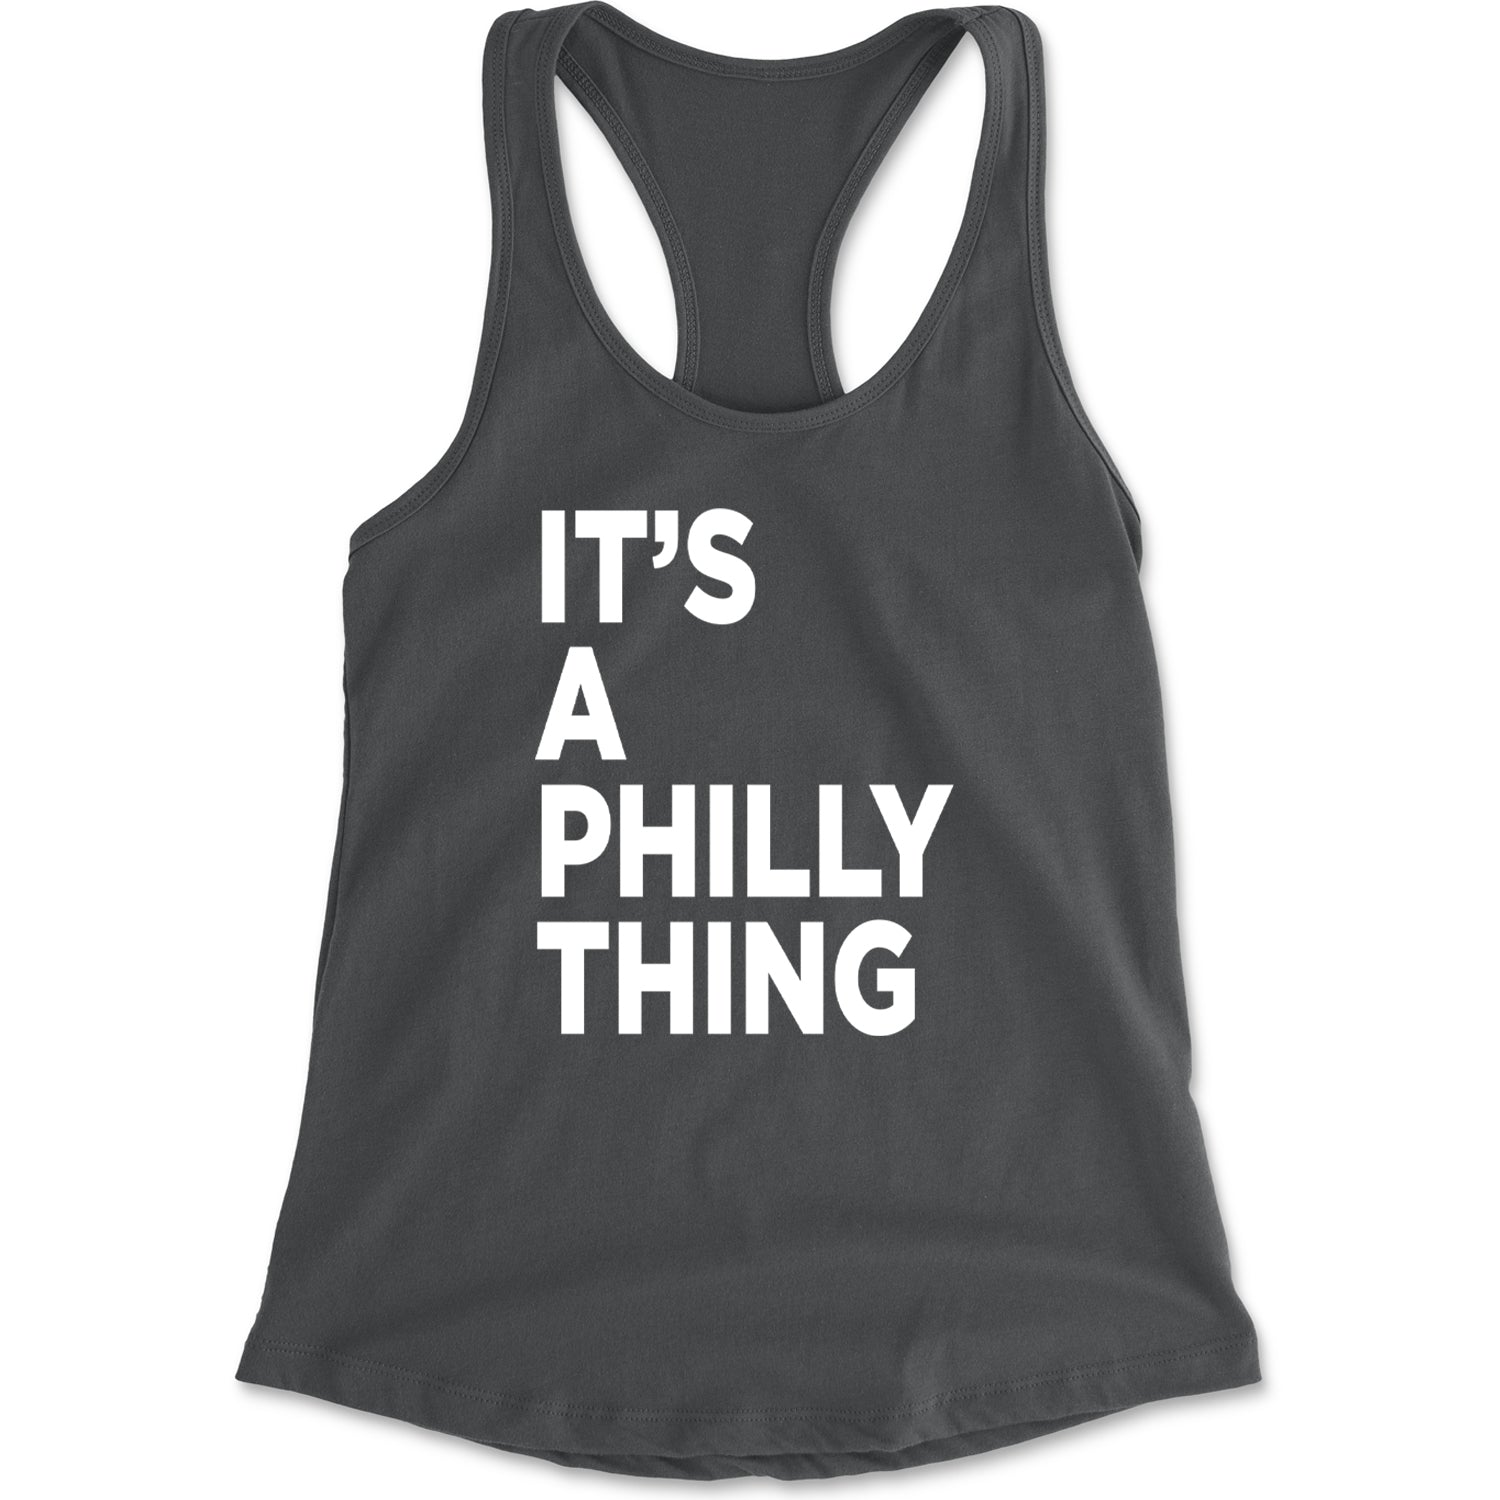 PHILLY It's A Philly Thing Racerback Tank Top for Women baseball, dilly, filly, football, jawn, morgan, Philadelphia, philli by Expression Tees